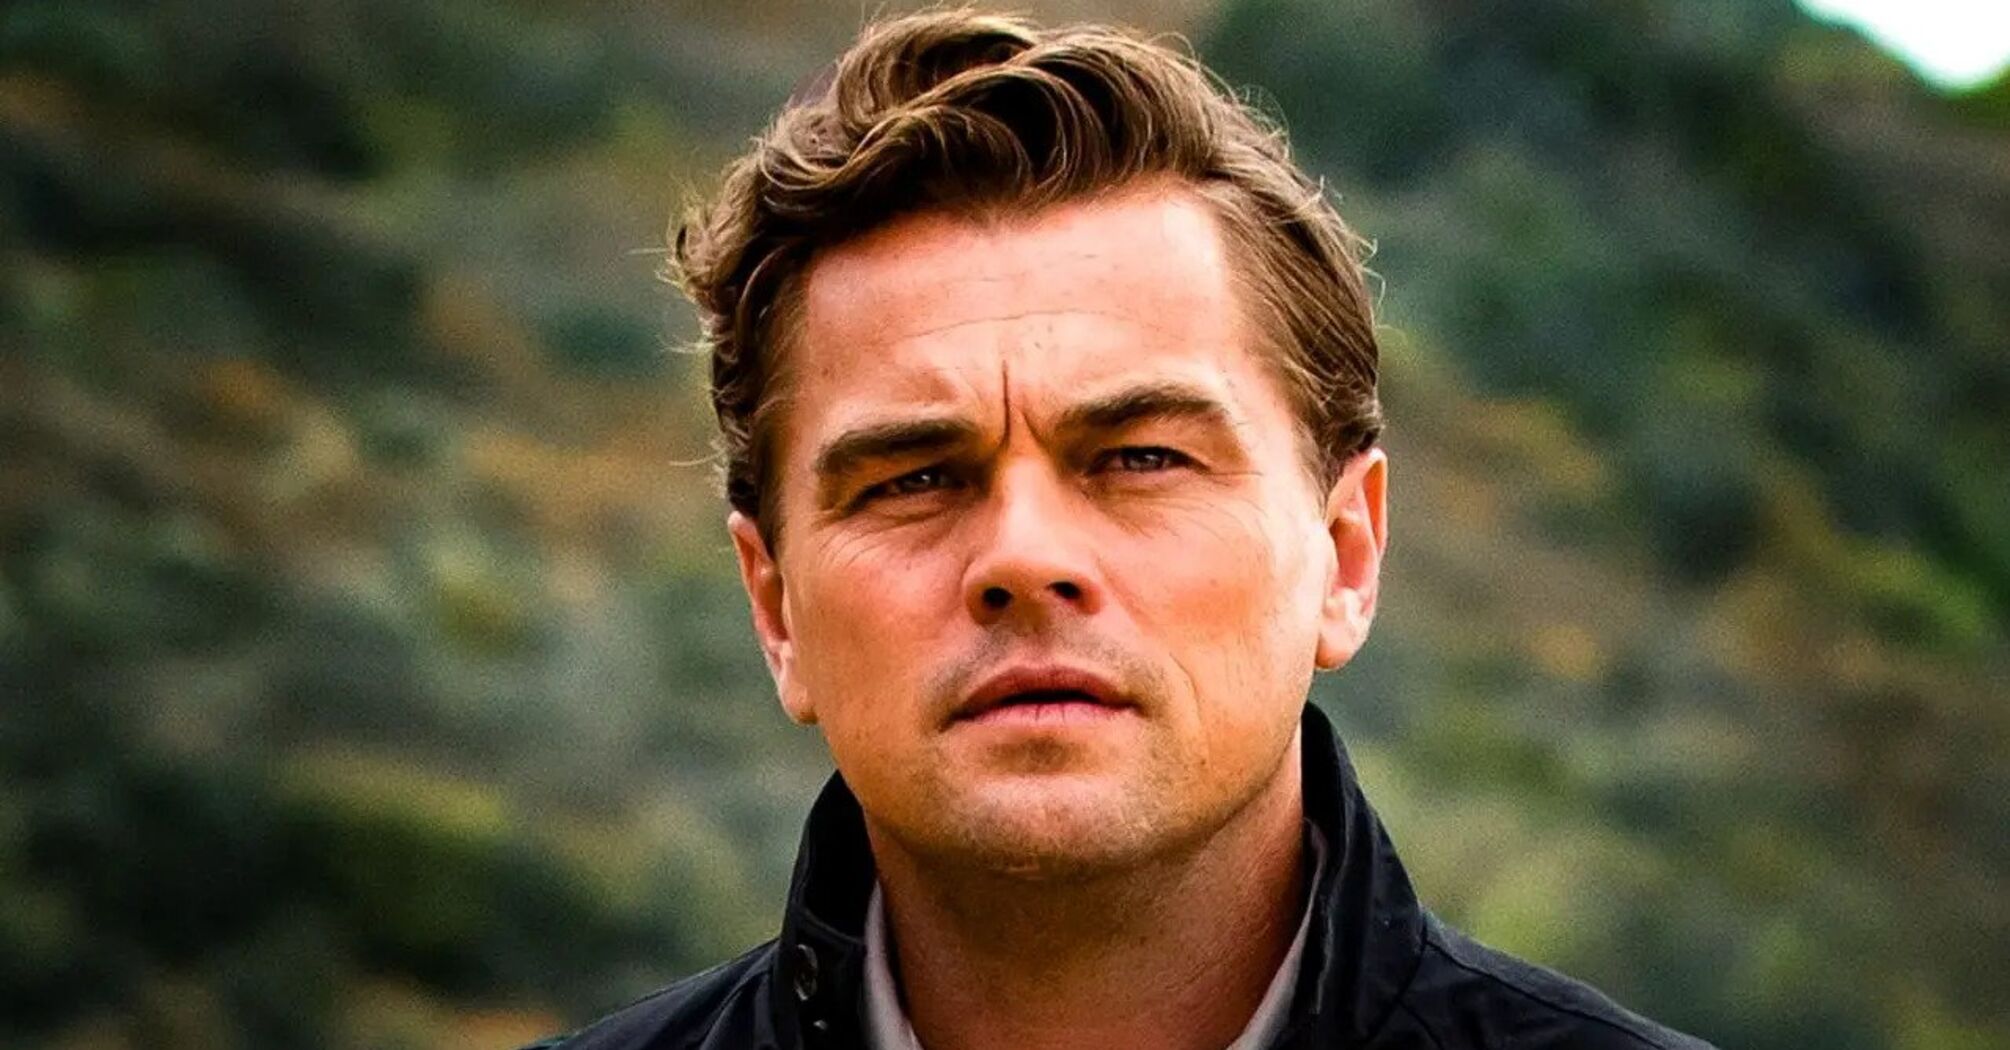 5 little-known facts about Leonardo DiCaprio